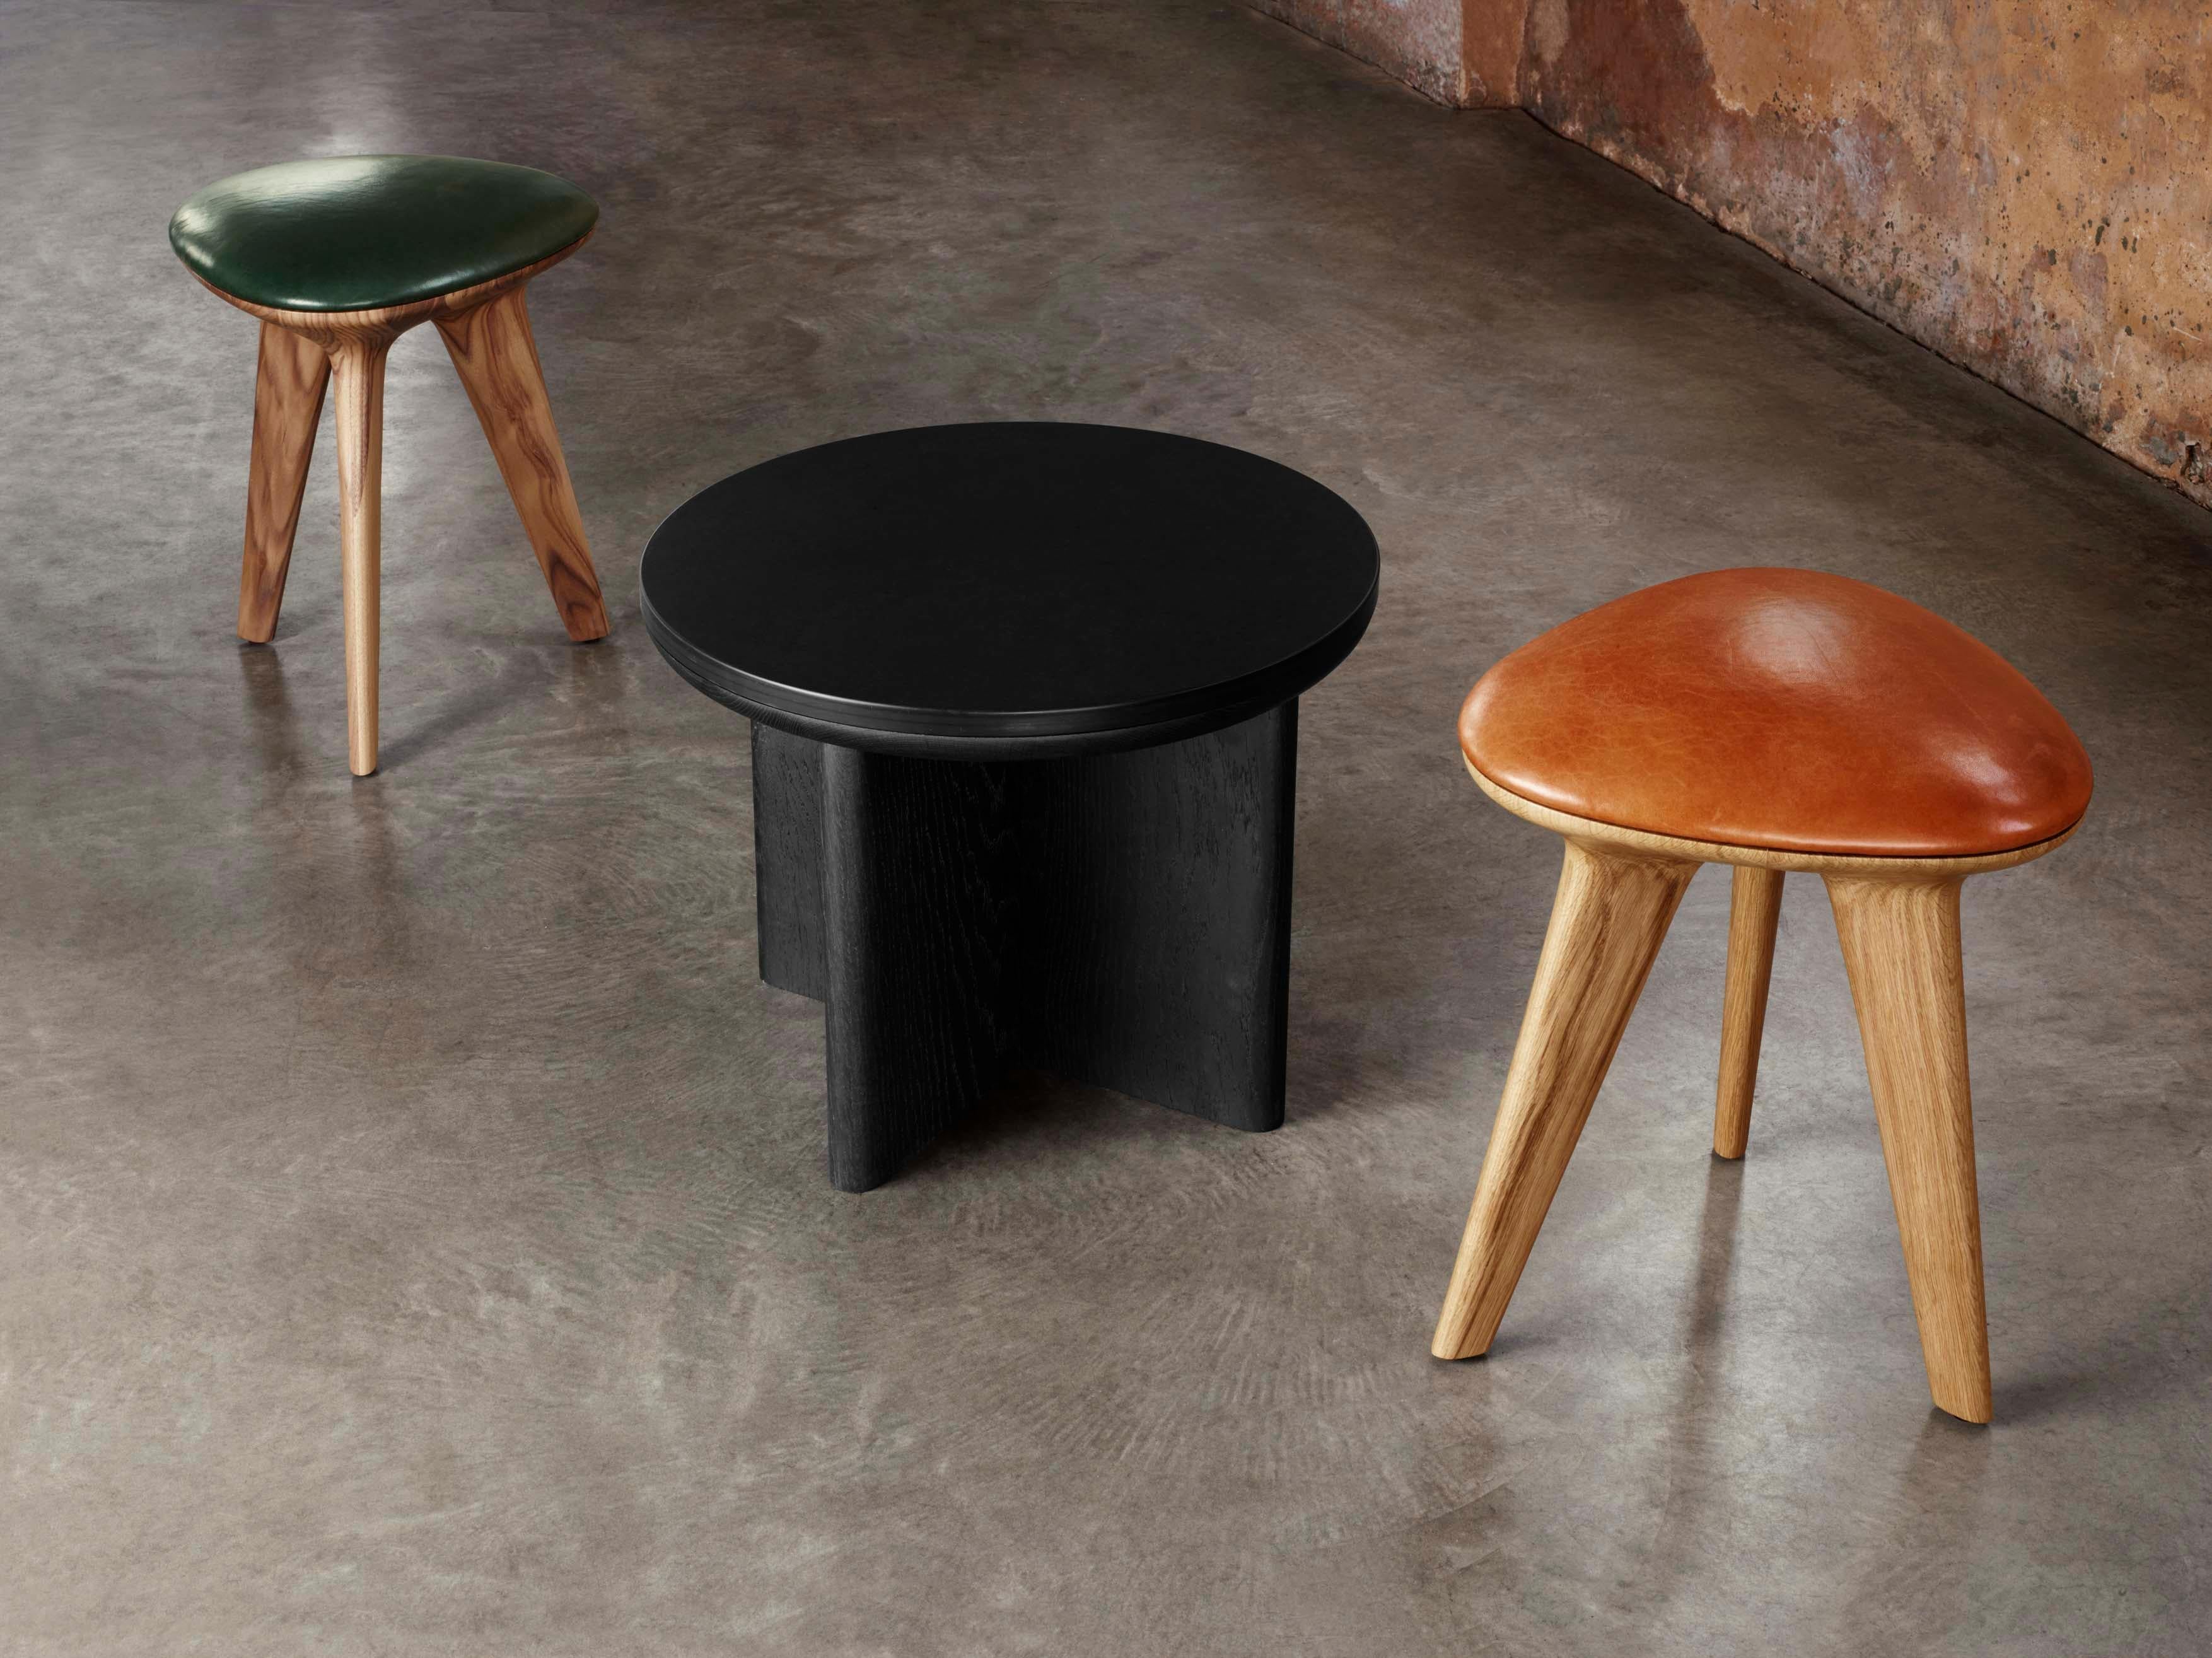 British Rotor, Solid Black Oak Stool with Black Padded Leather Seat by Made in Ratio For Sale